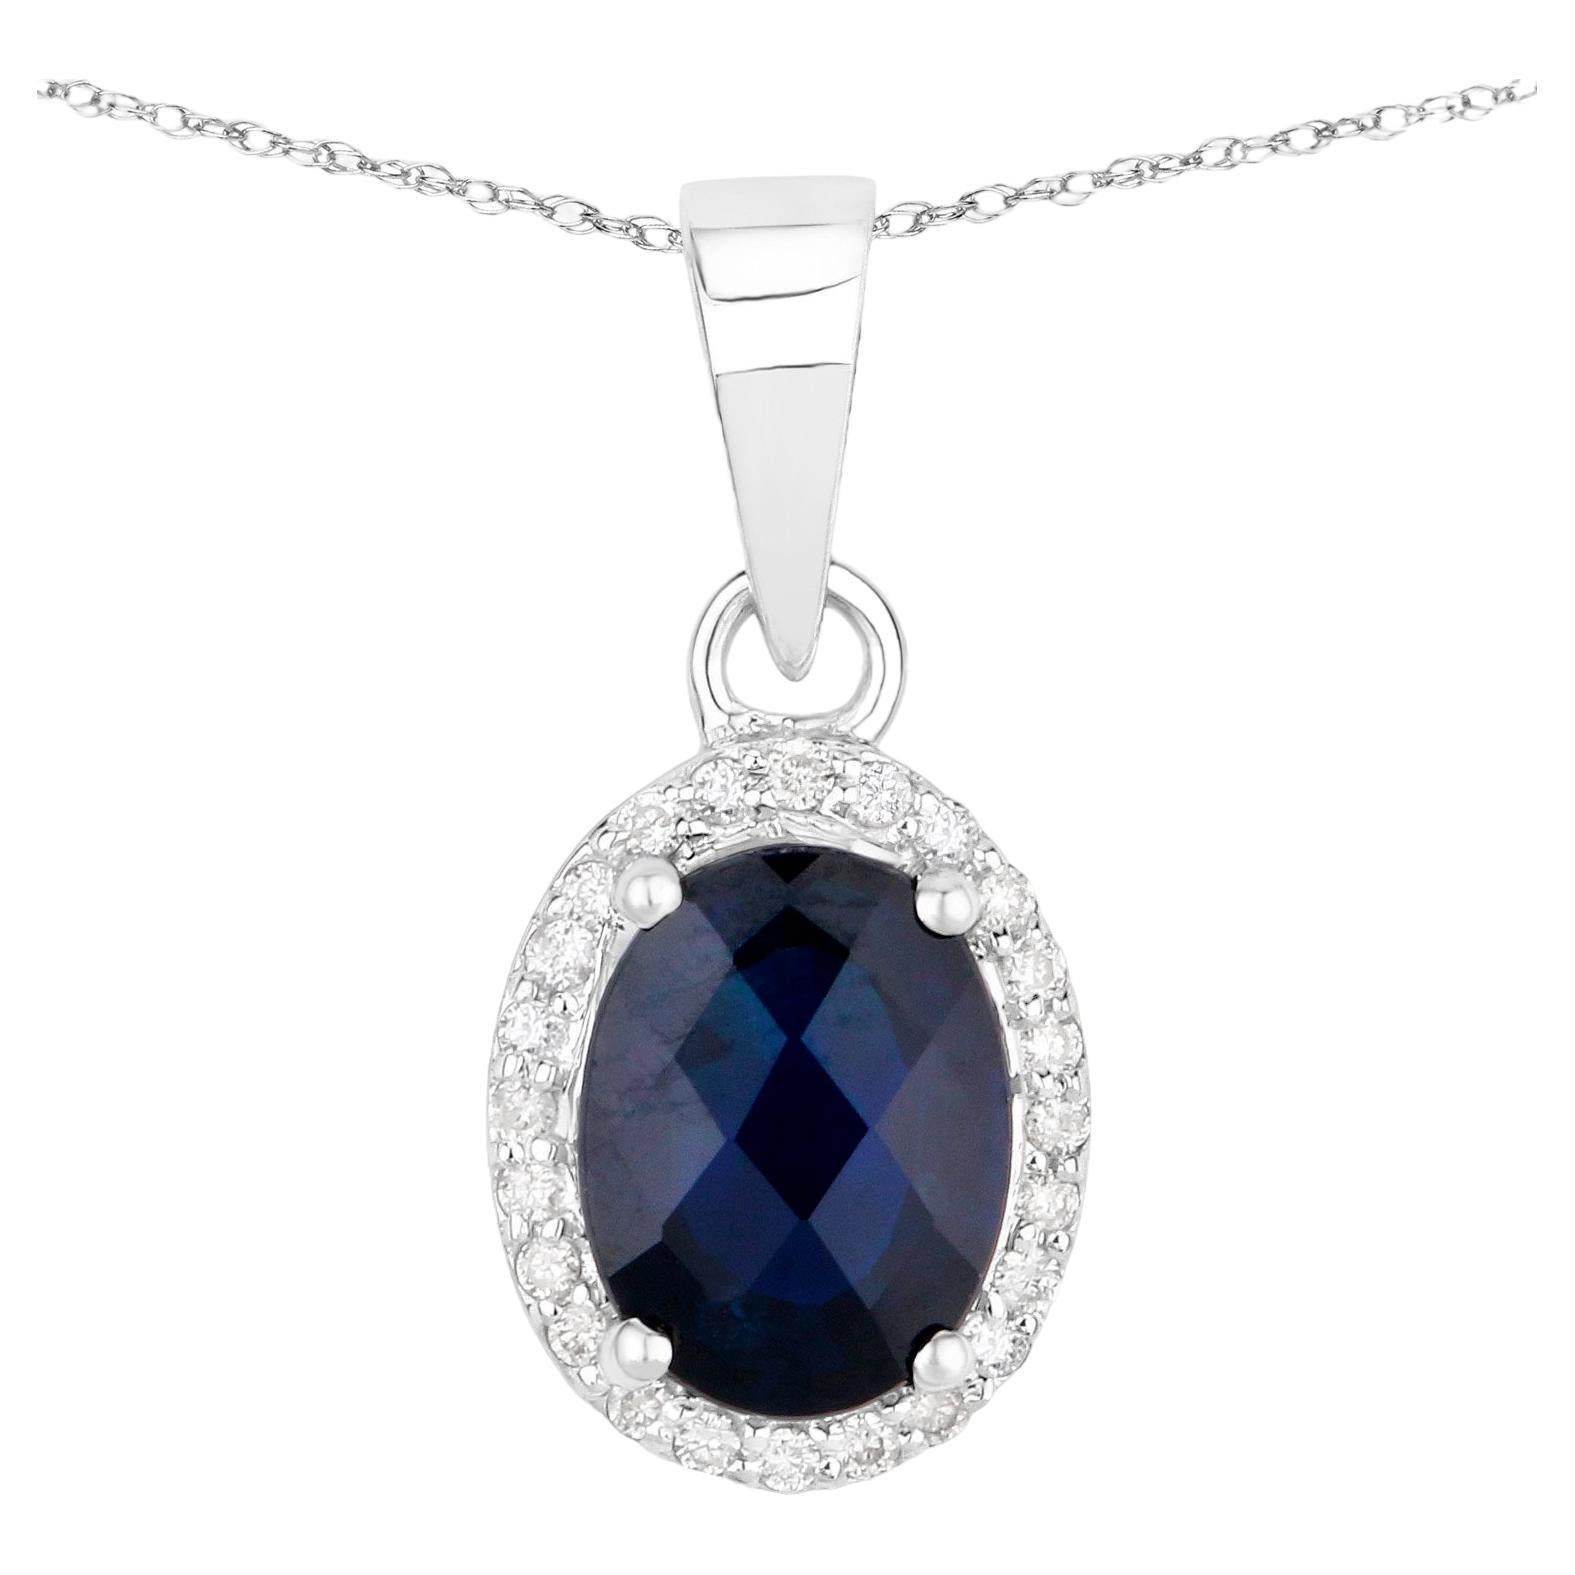 Blue Sapphire Necklace With Diamond Halo 1.66 Carats 14K White Gold For Sale